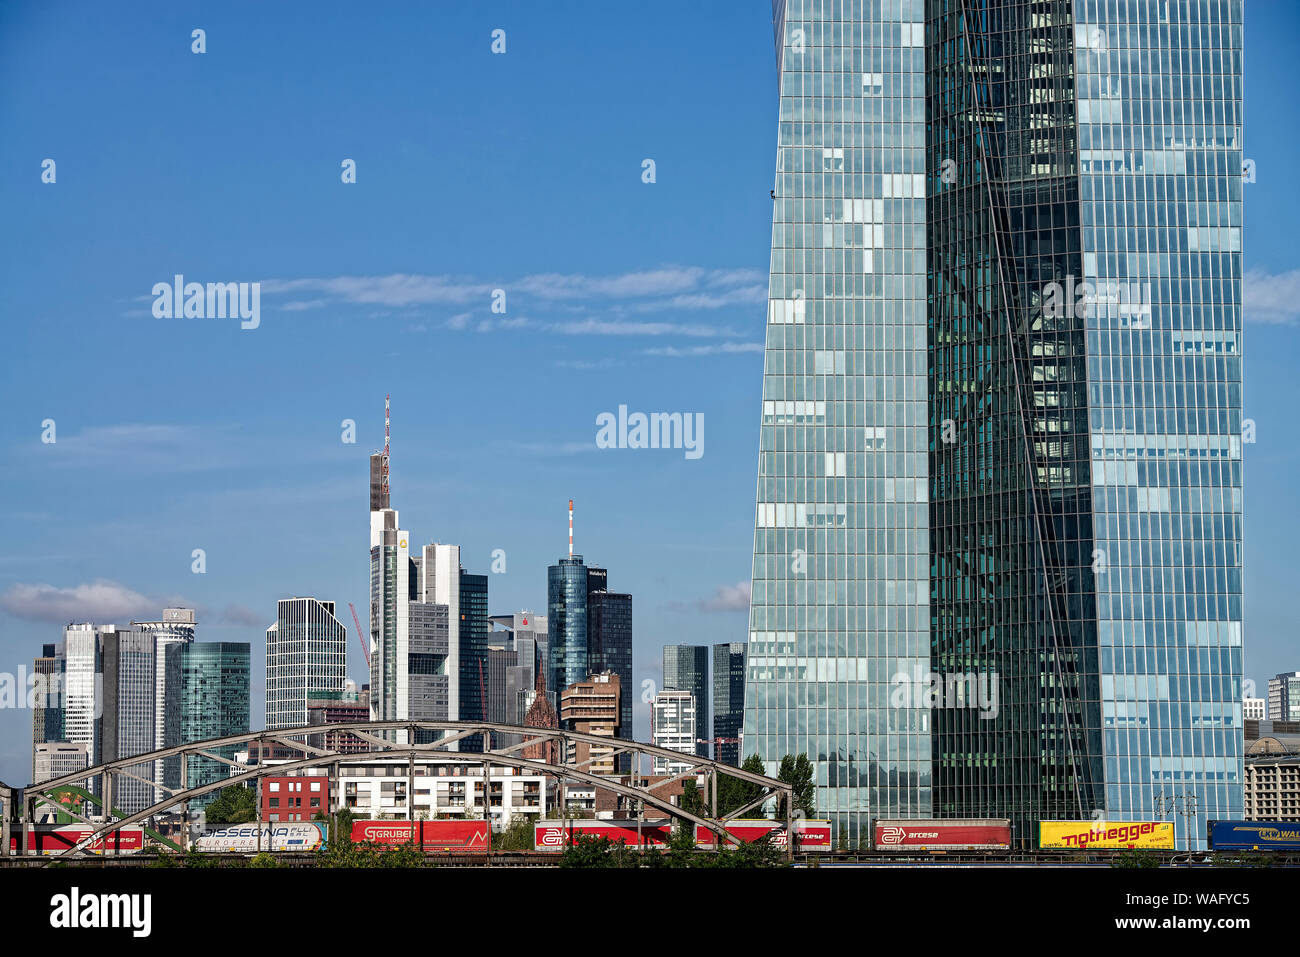 European Central Bank (ECB) with the skyline of Frankfurt in the background Stock Photo